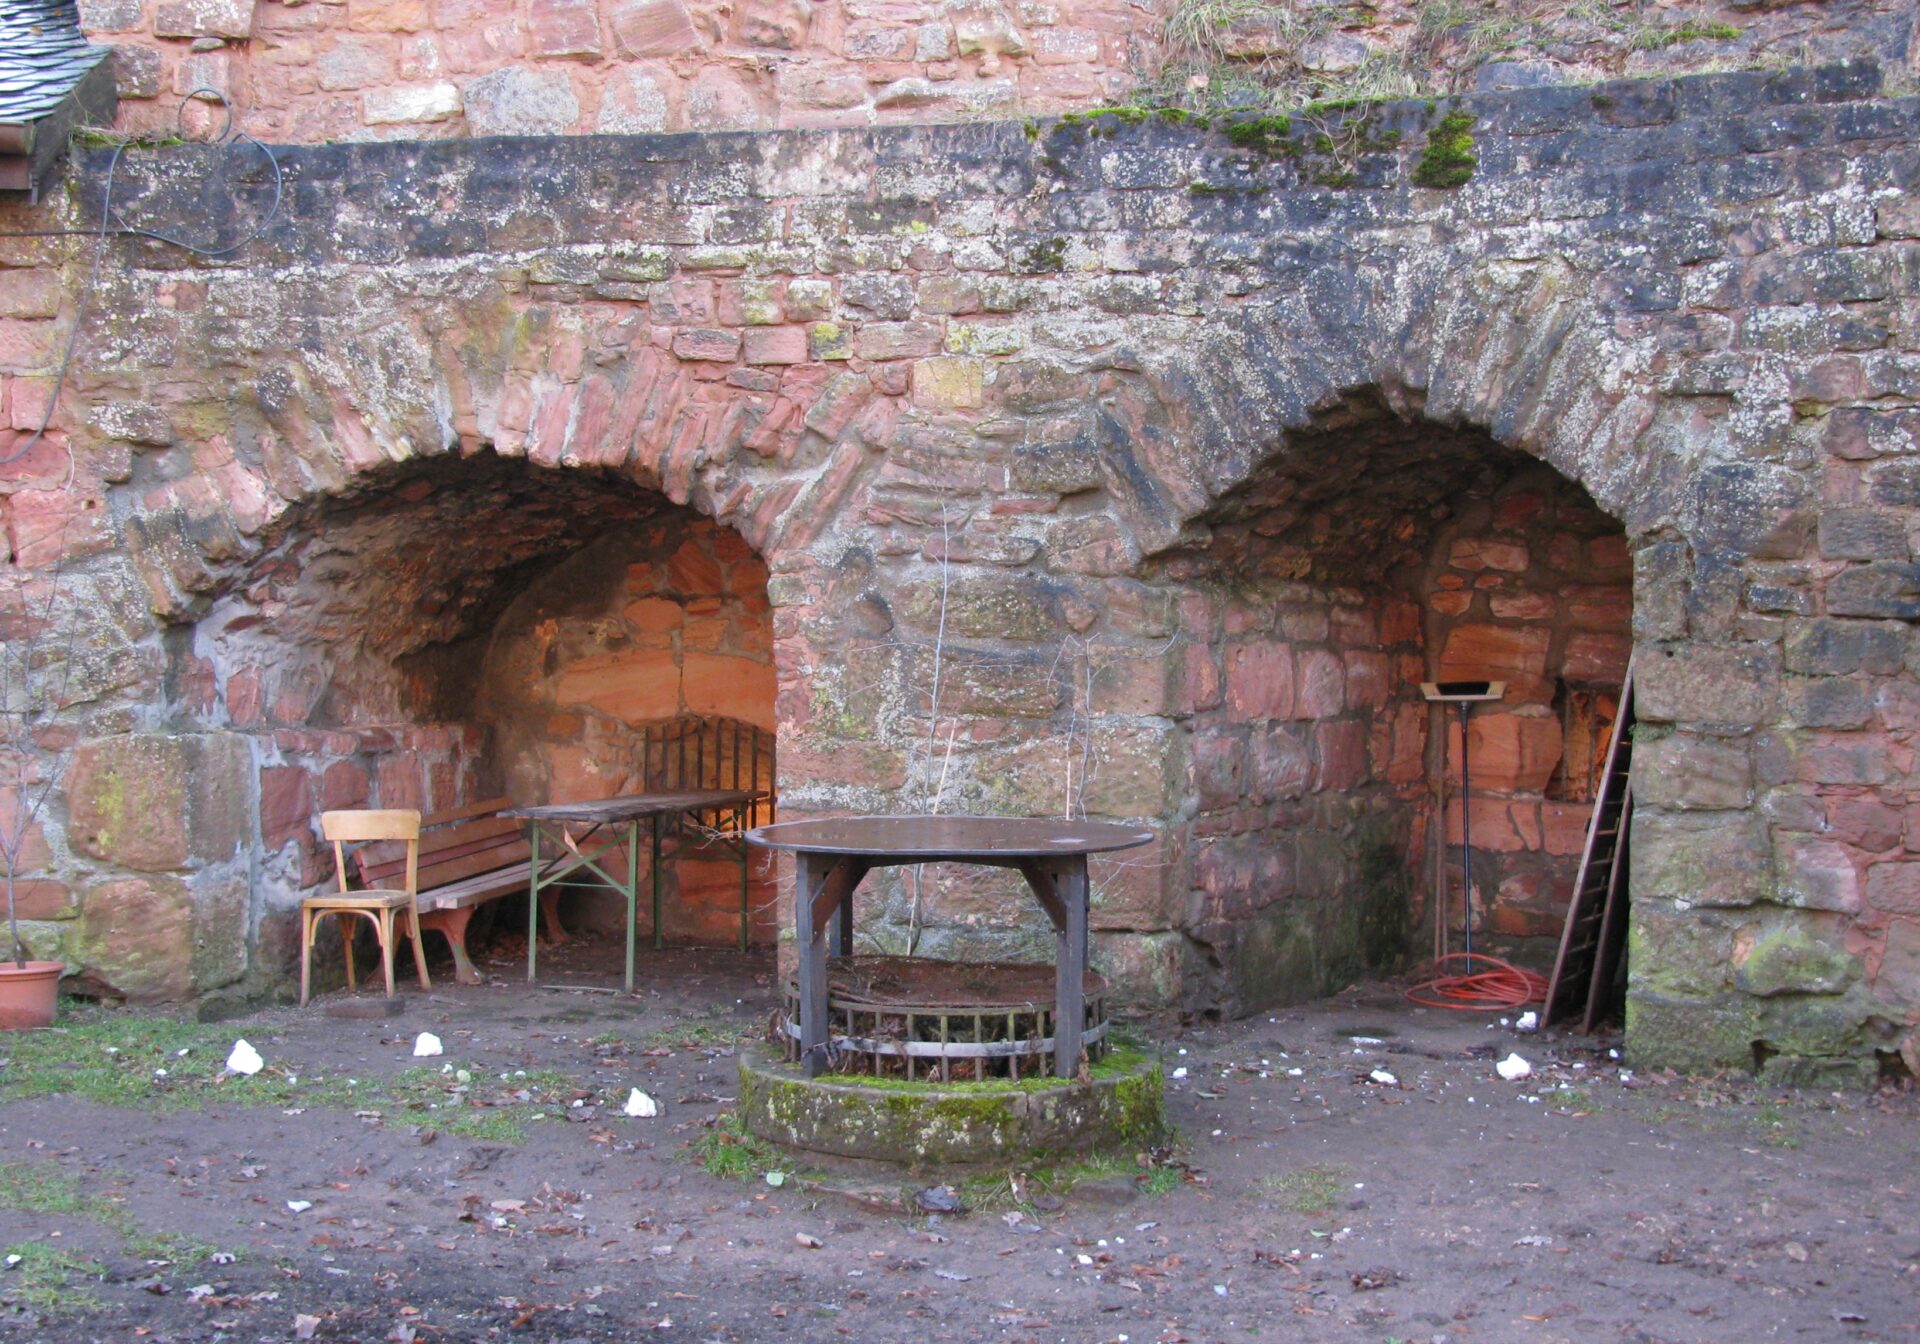 Two arched alcoves in an old red brick wall, with an empty table and chairs on the left and a round well-like structure in the center. There is scattered debris on the ground.